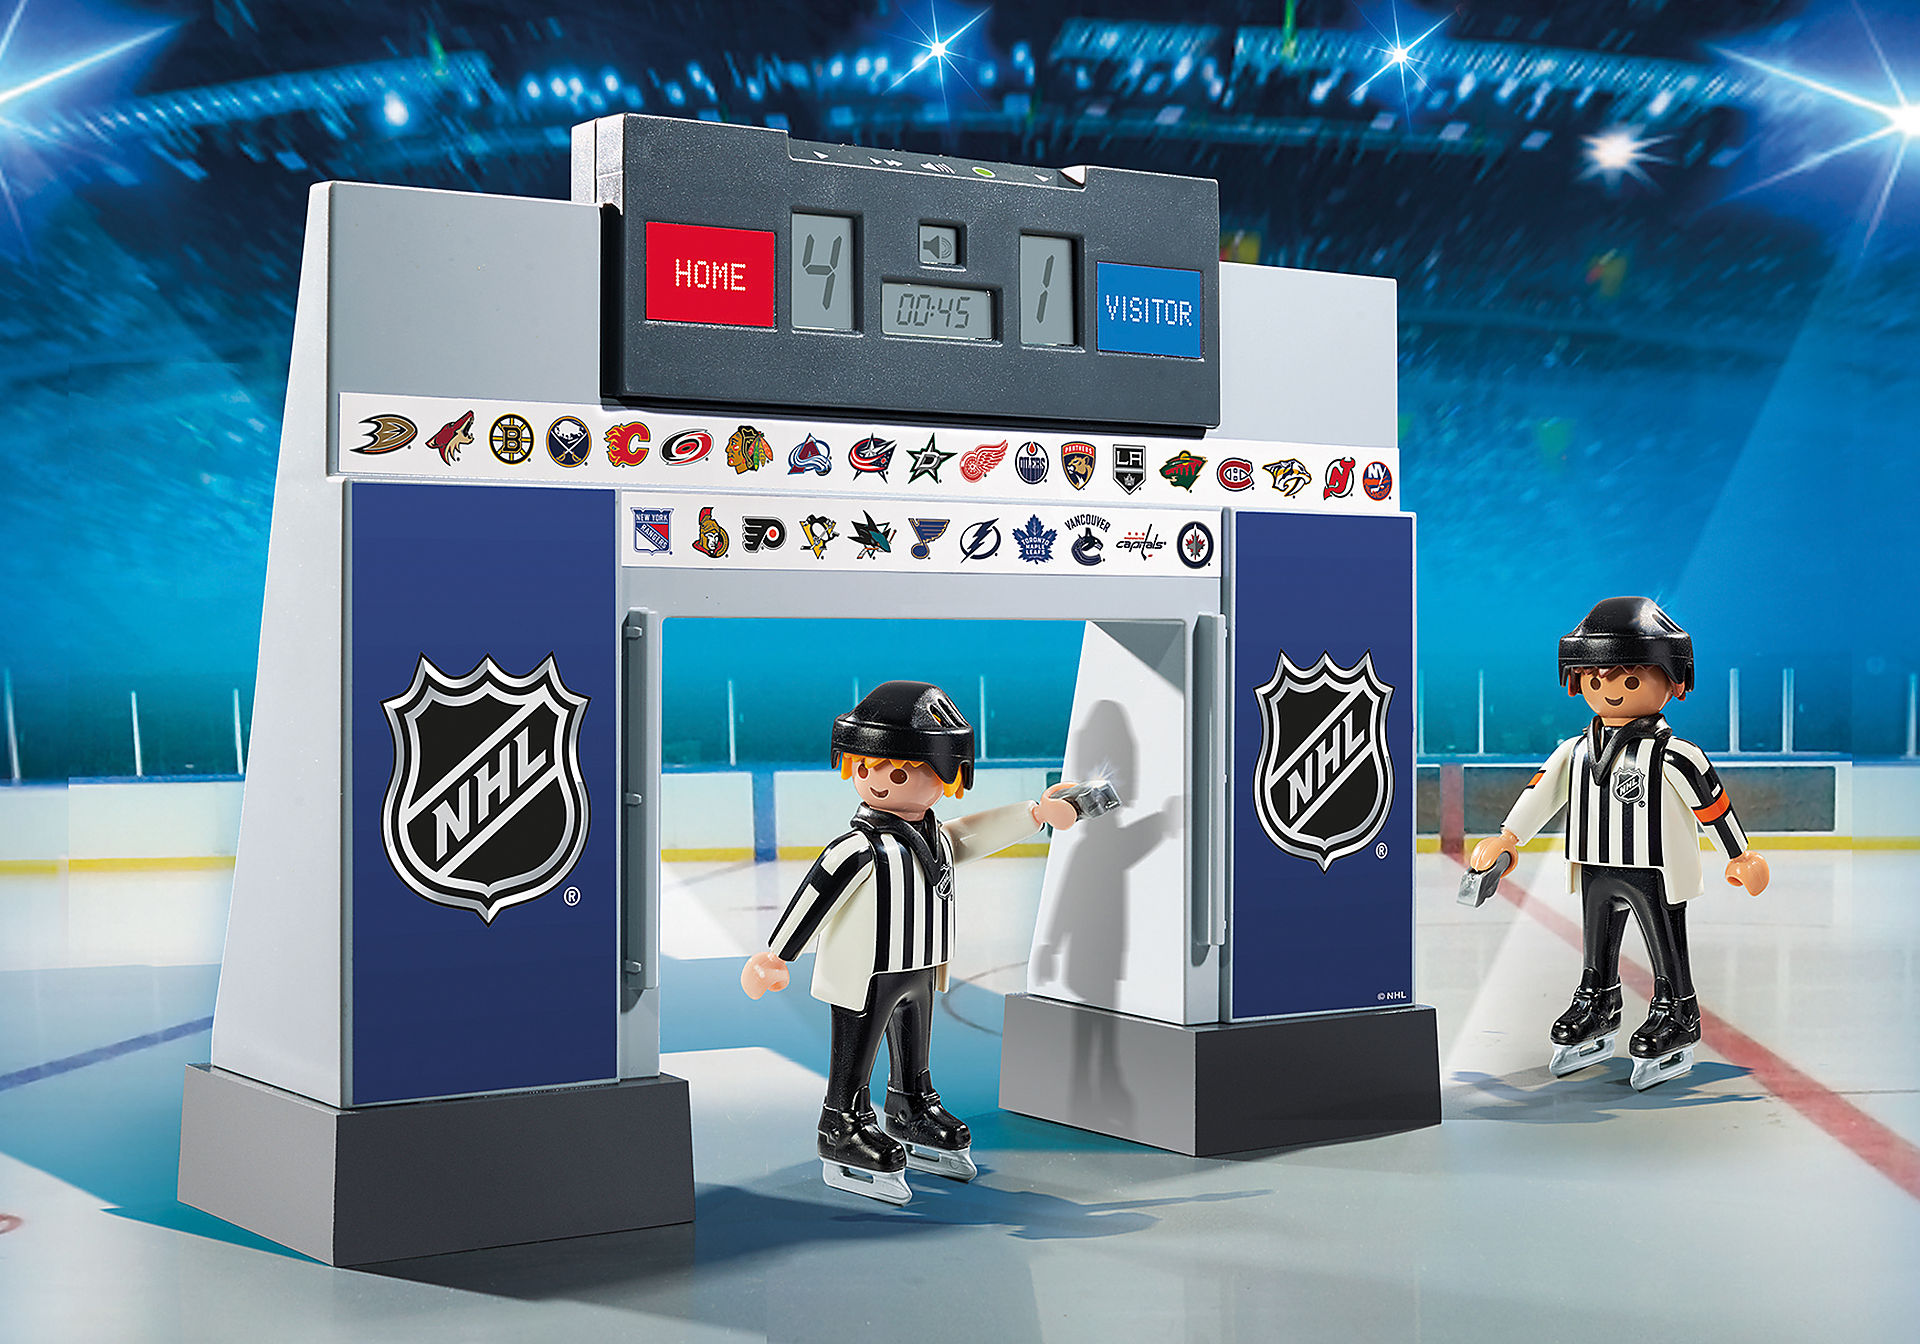 9016 NHL® Score Clock  with 2 Referees zoom image1